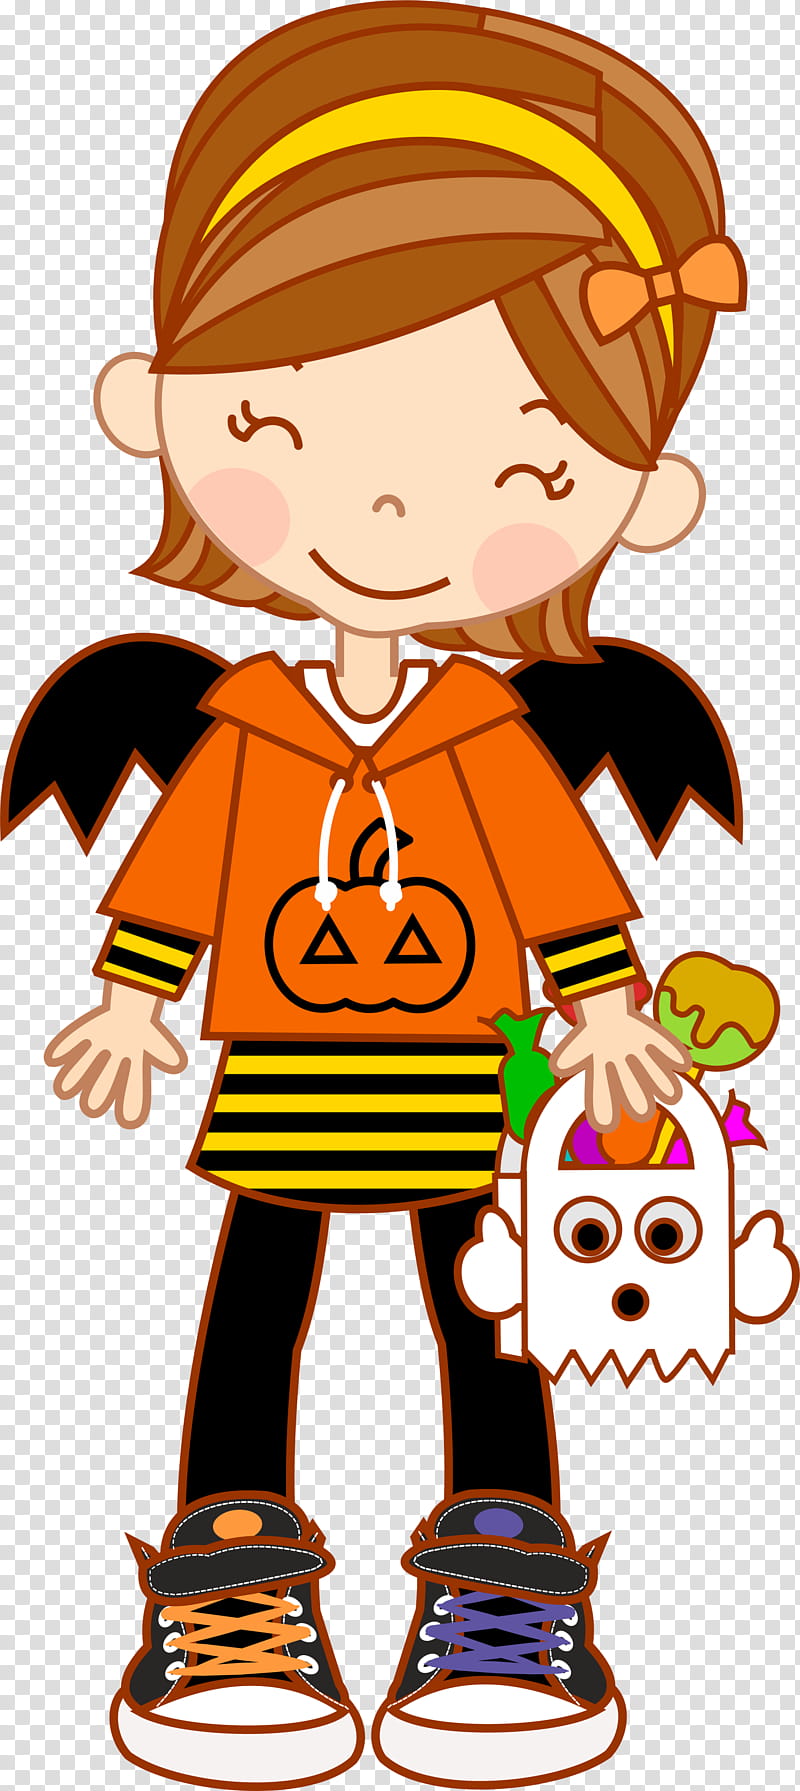 Halloween Cartoon Character, Halloween , Costume, Party, Pin, Witch, Holiday, Halloween Costume transparent background PNG clipart